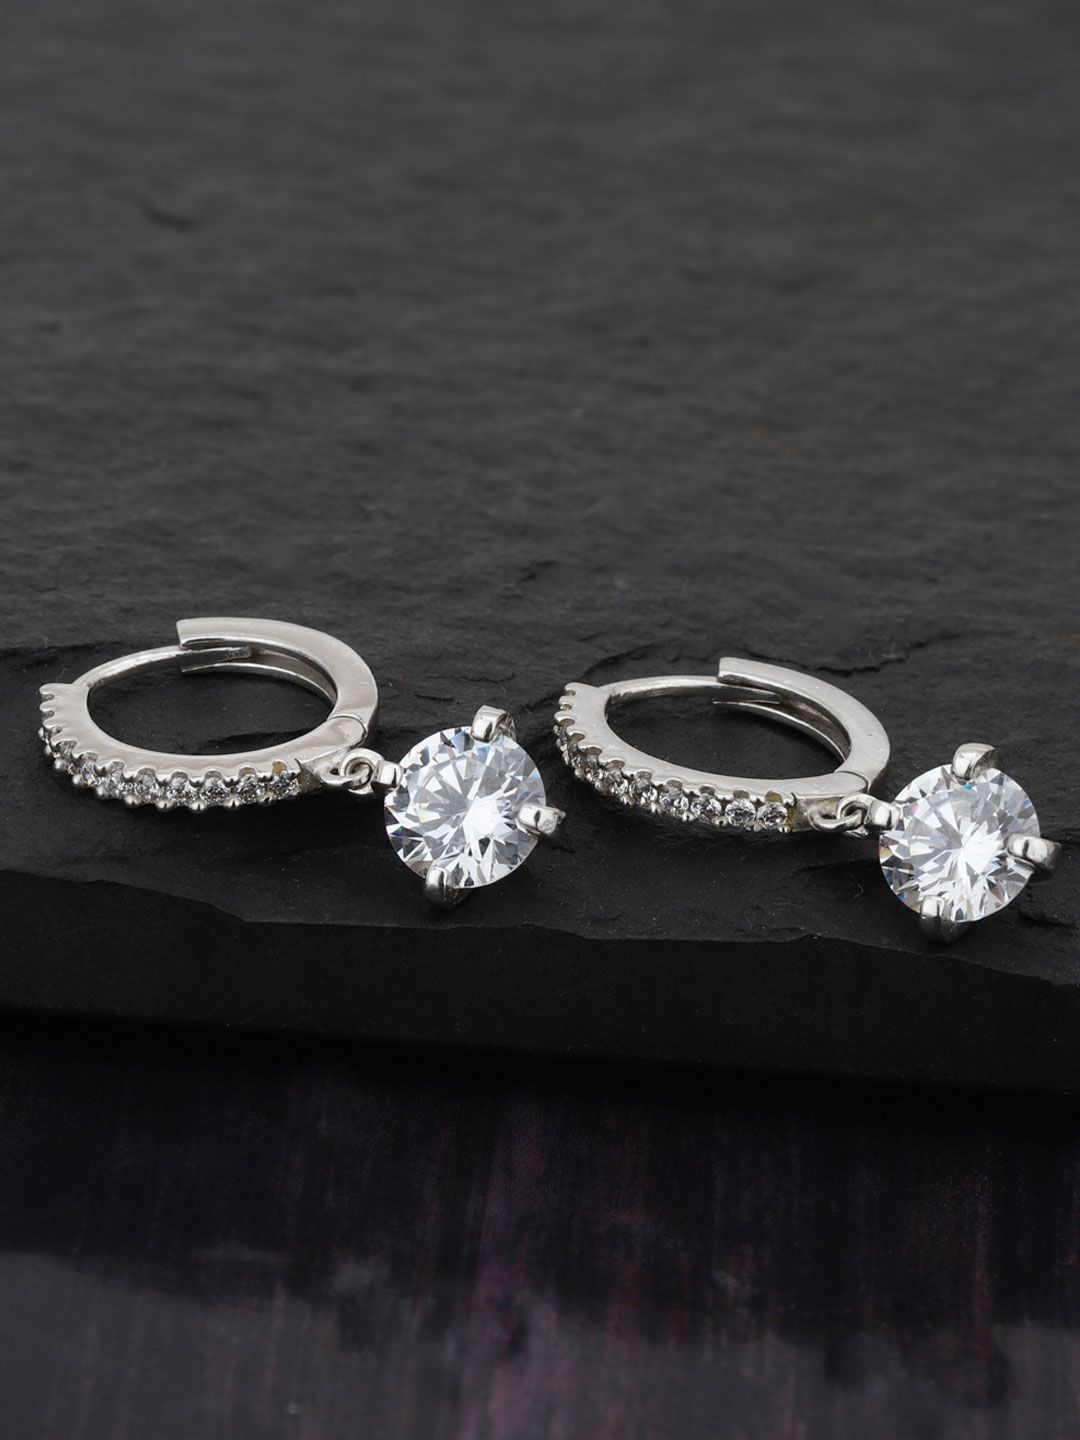 Carlton London Silver-Toned Rhodium-Plated CZ Stone Hoop Earrings Price in India